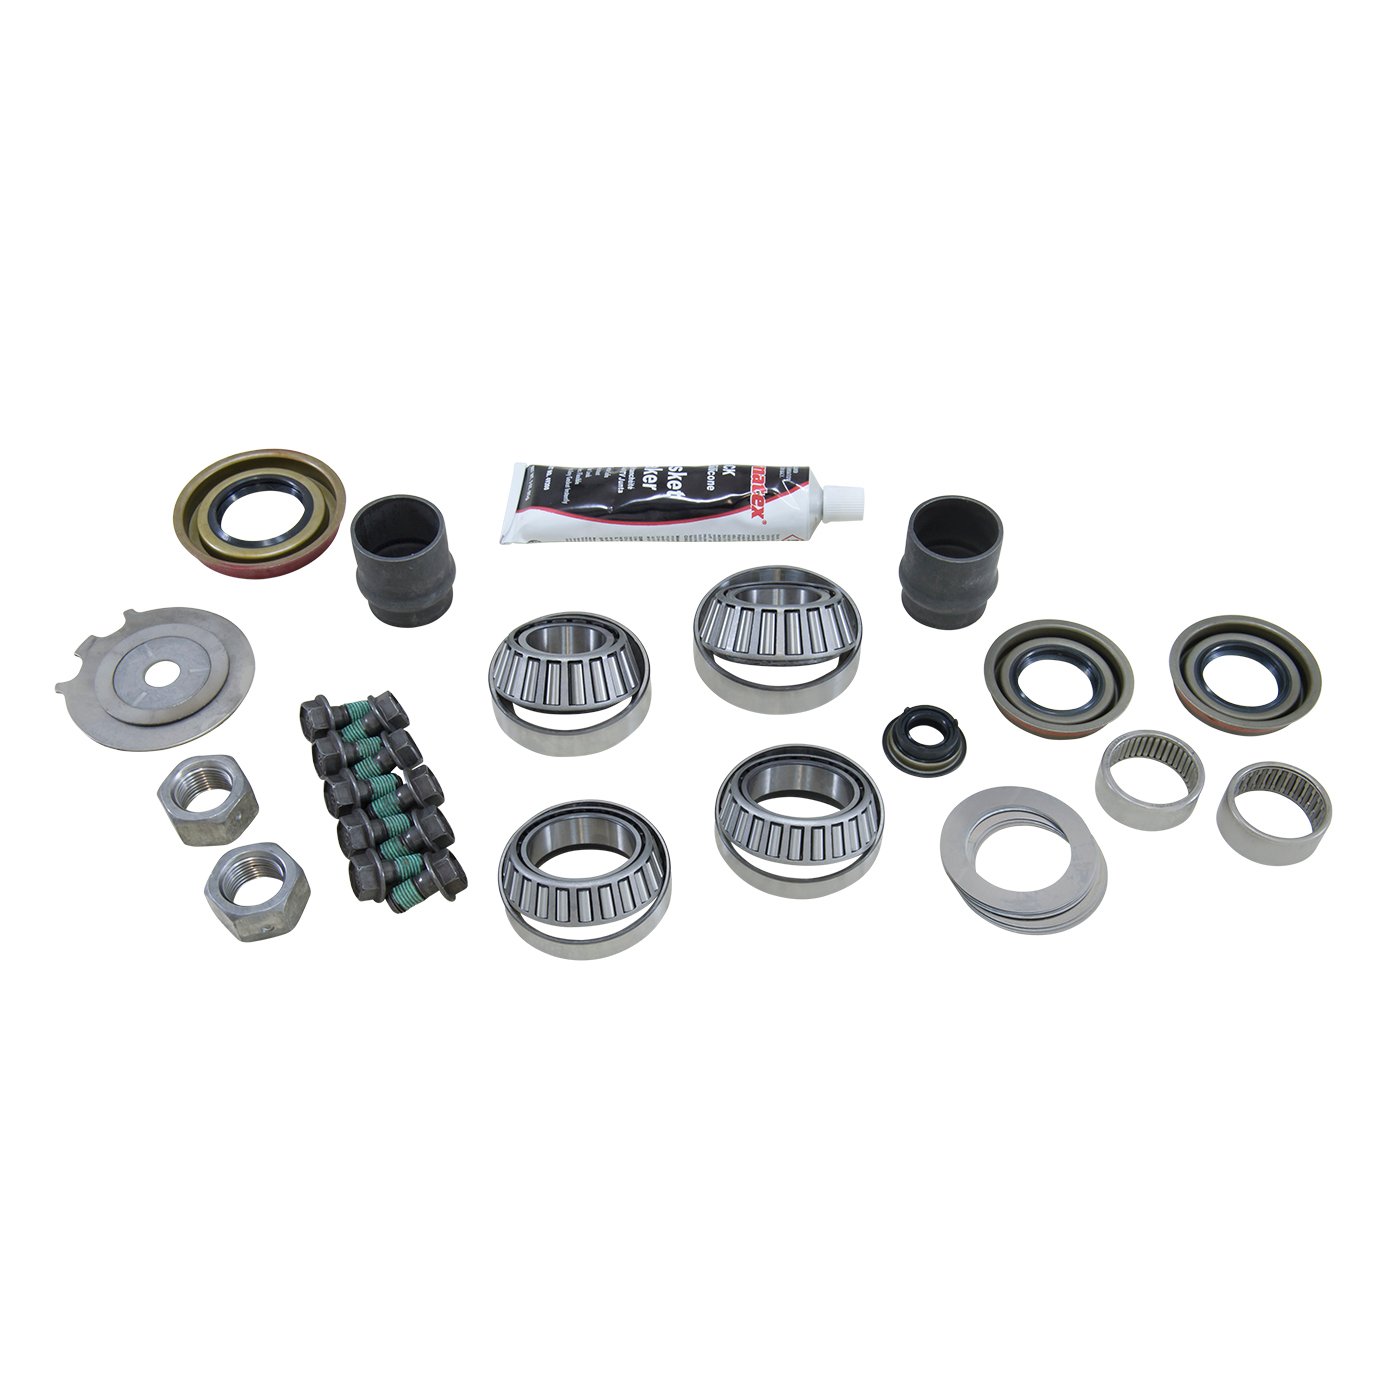 Master Overhaul Kit For '98-'03 GM S10 And S15 Awd 7.2 in. Ifs Differential